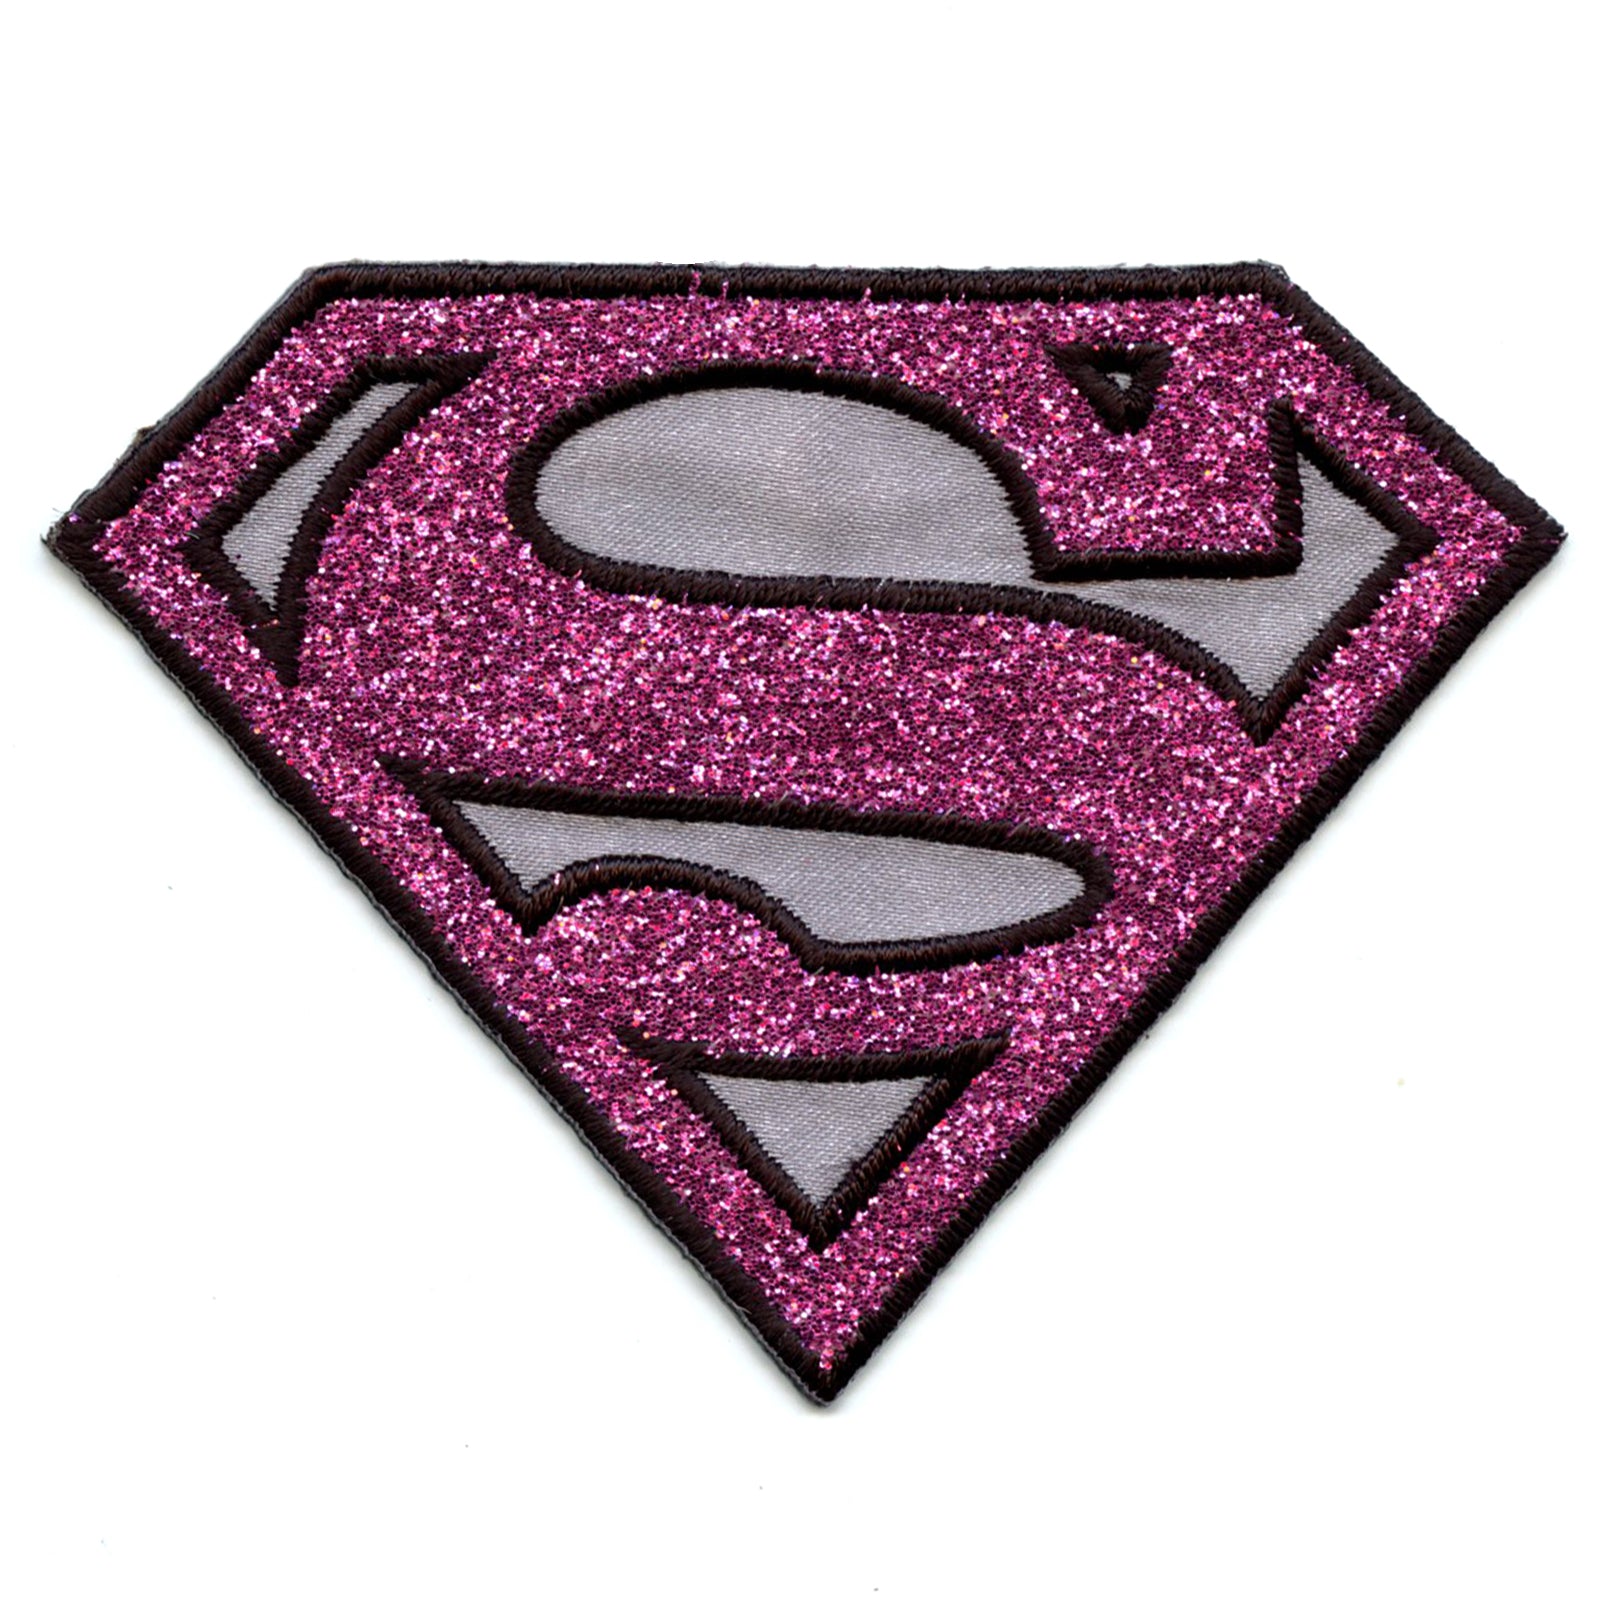 Dc Comics Supergirl Pink Shimmer Iron on Applique Patch - Medium 